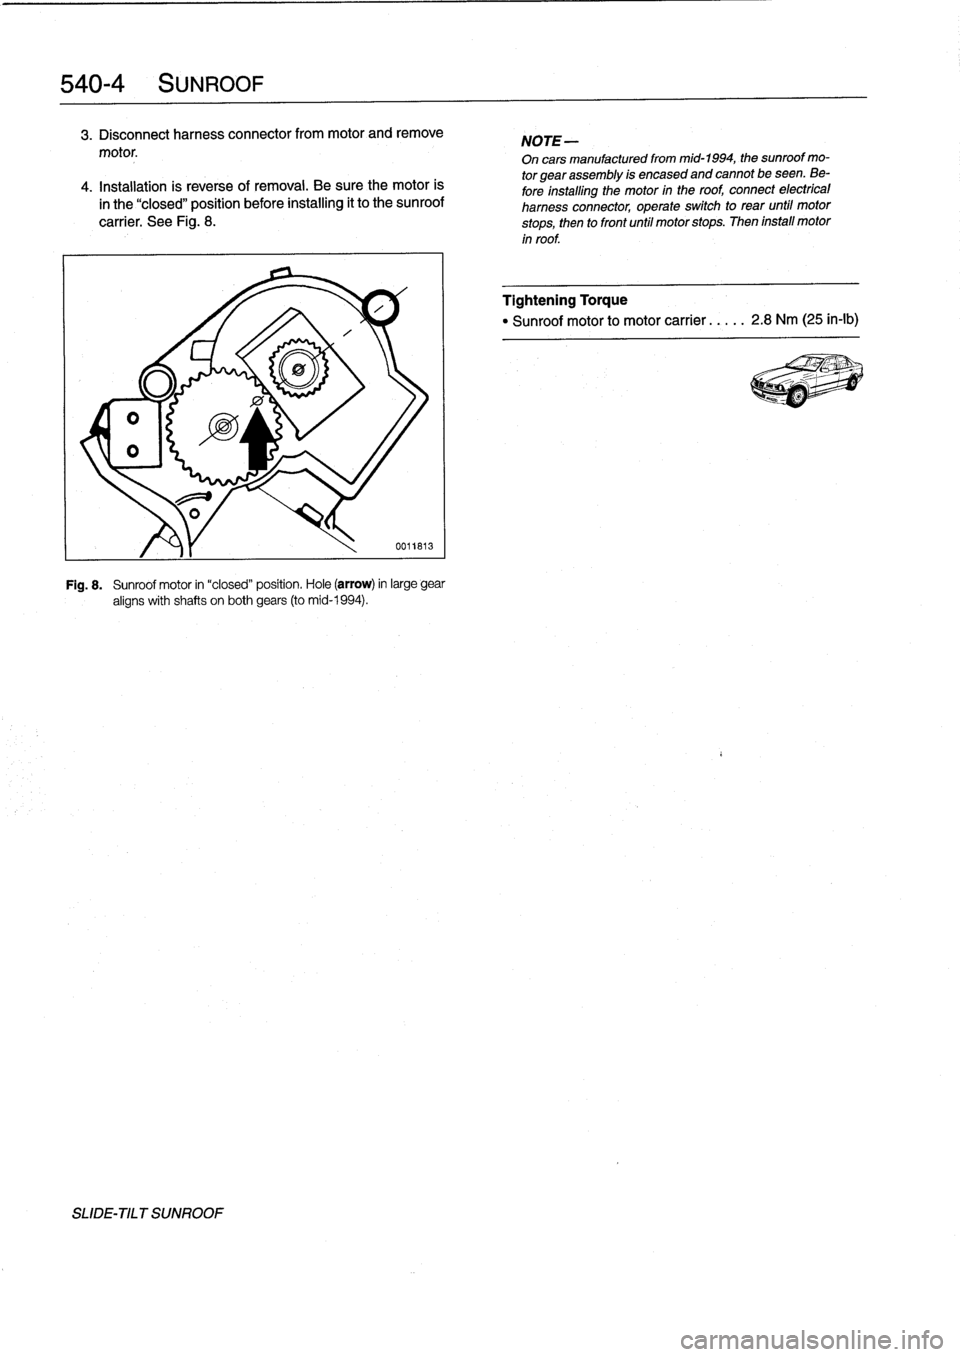 BMW M3 1998 E36 Workshop Manual 
540-
4
SUNROOF

3
.
Disconnect
harness
connector
from
motor
and
remove

motor
.

4
.
Installation
is
reverse
of
removal
.
Be
sure
the
motor
is
in
the
"closed"
position
before
installing
it
to
the
sun